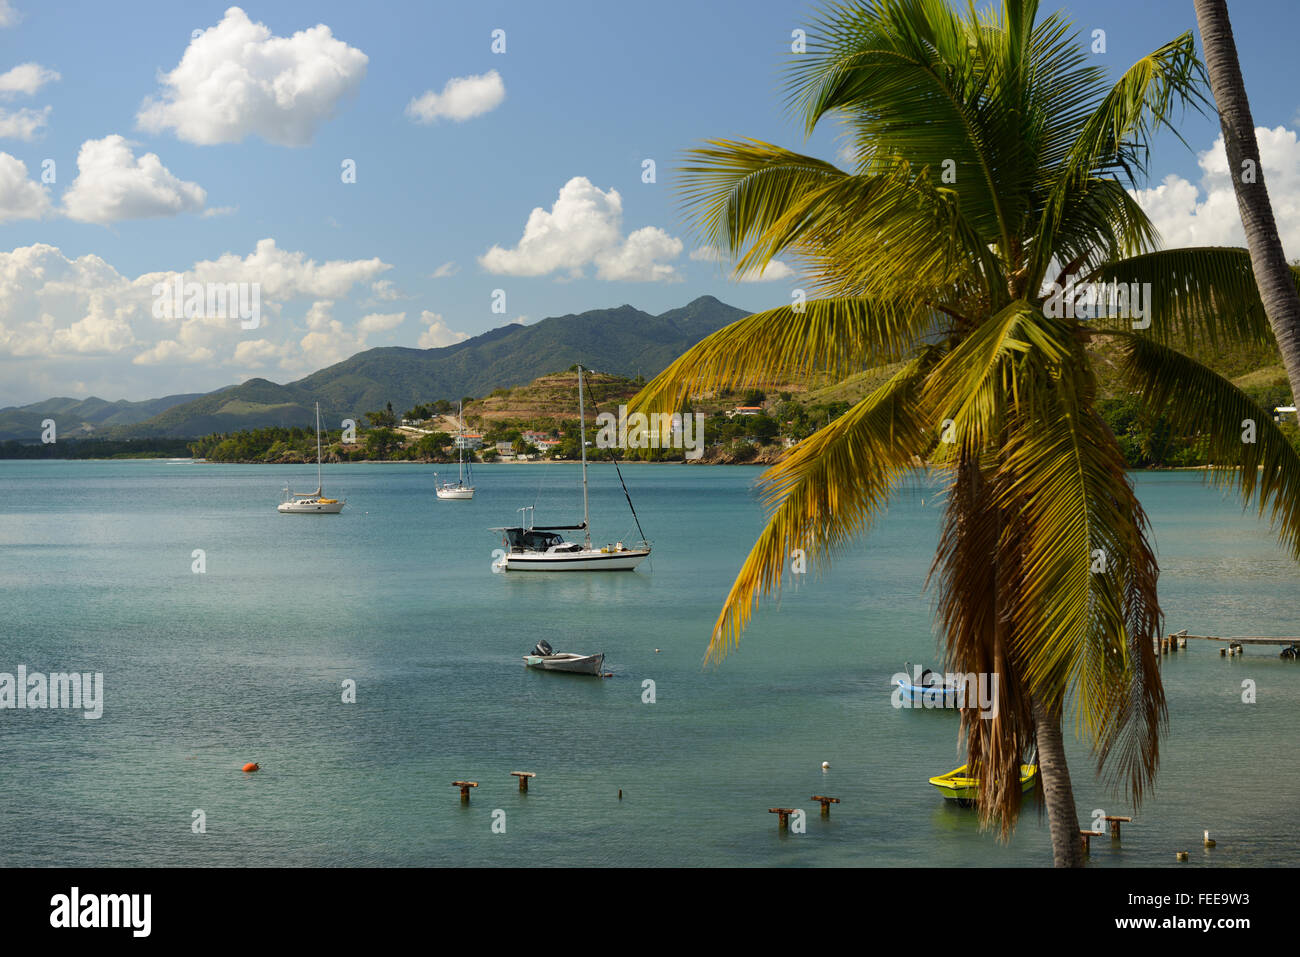 Tropical scene of sky, mountains, palm trees, boats and calm waters. Patillas, Puerto Rico. Caribbean Island. Stock Photo